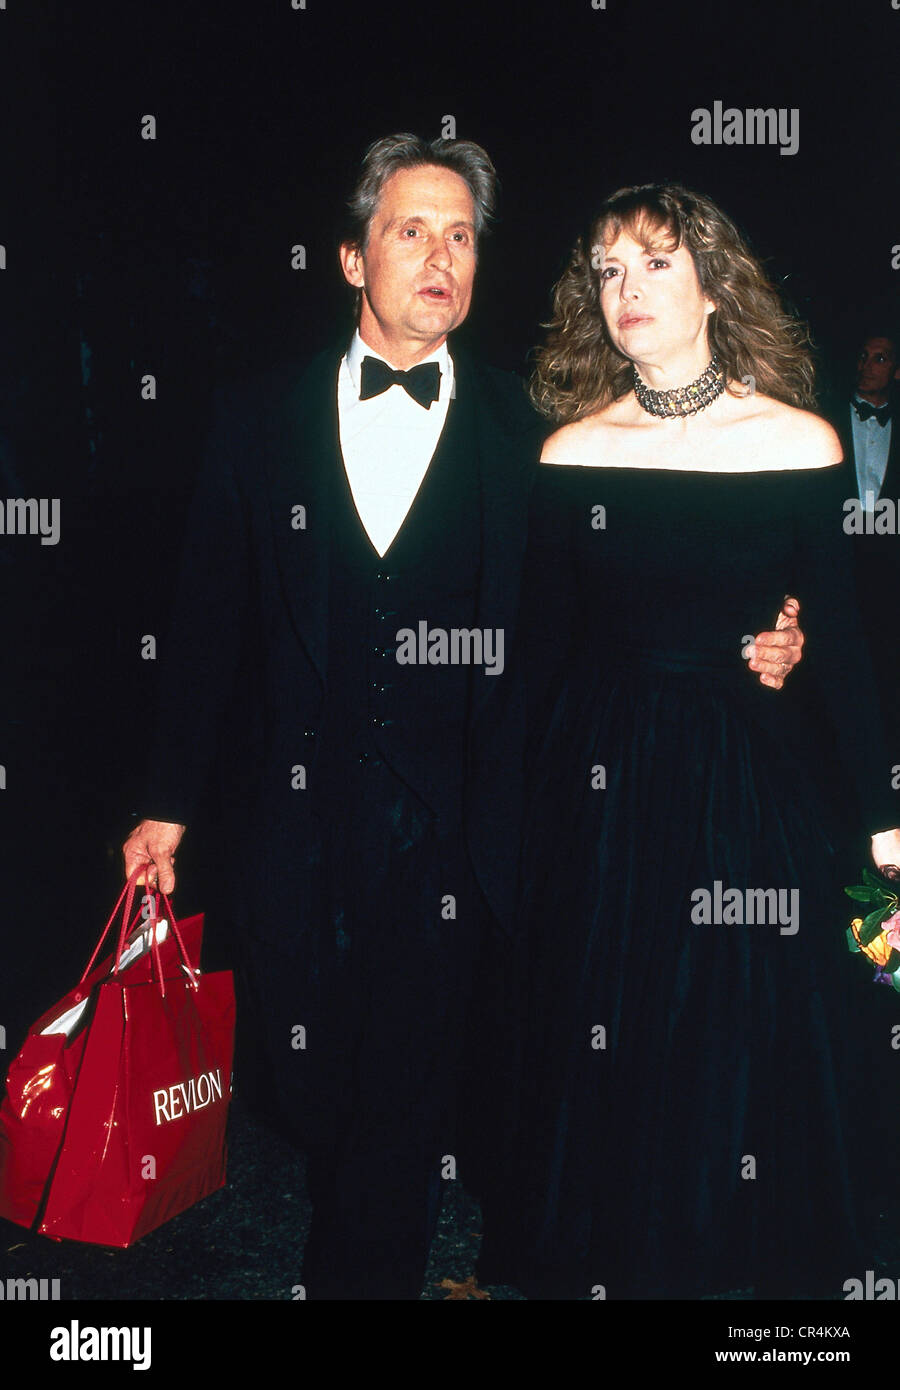 Michael Douglas And Wife Diandra High Resolution Stock Photography and  Images - Alamy